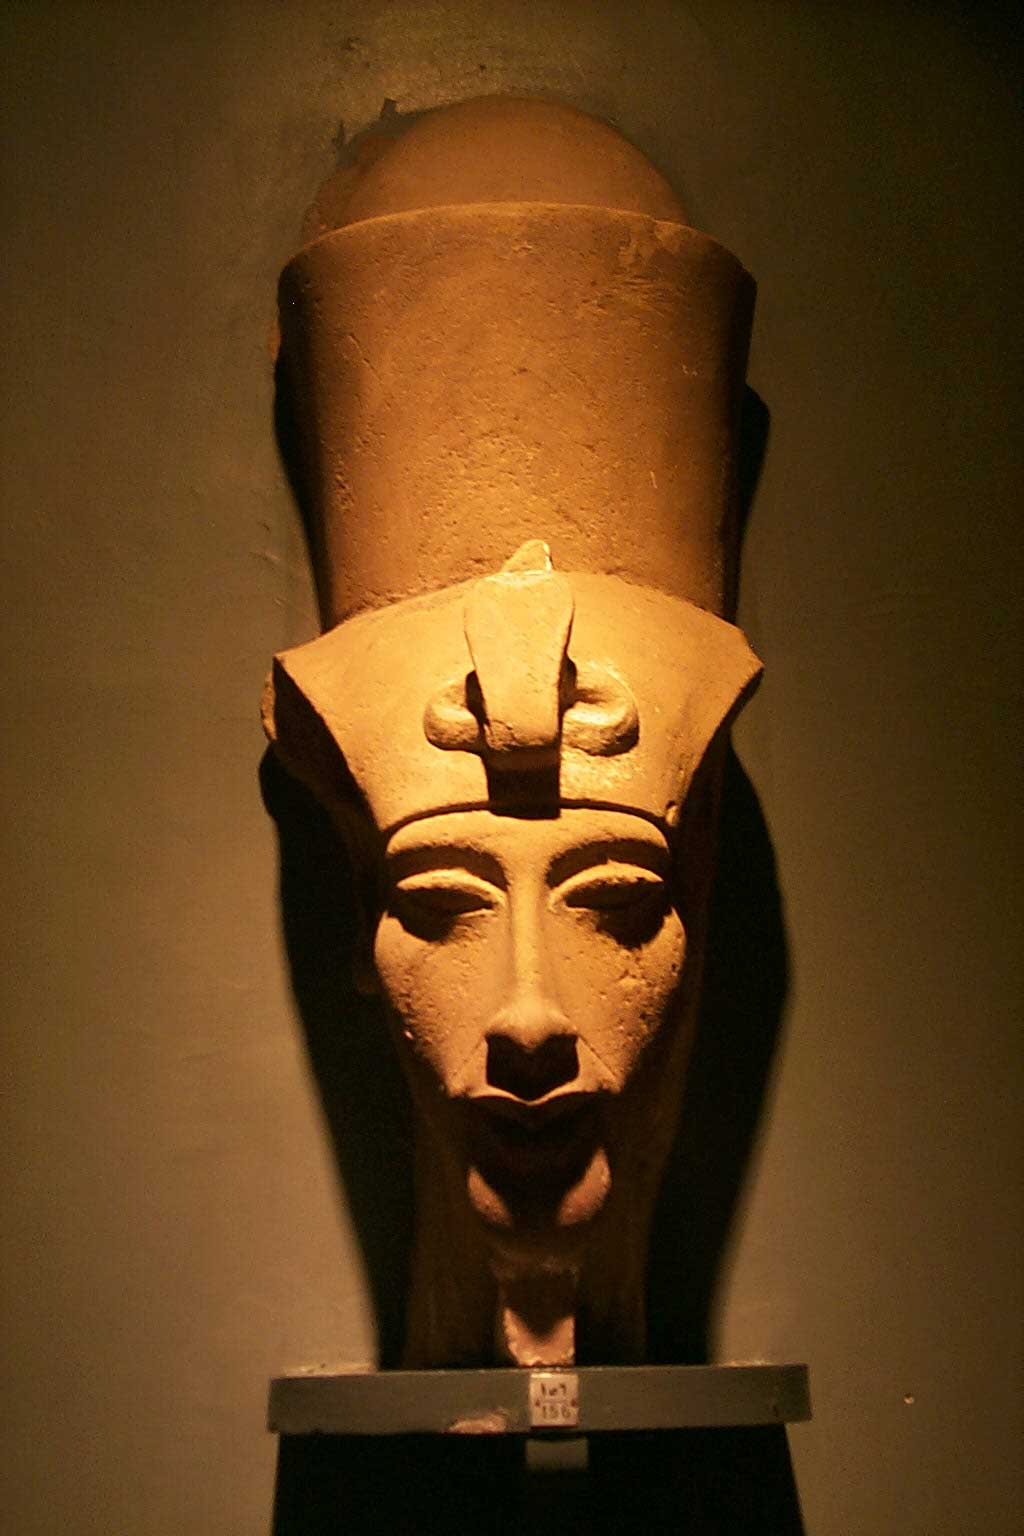 The picture is of a stone bust of Pharaoh Akhenaten. Here, the king is depicted with a slender face and extended facial features. Atop his head is the double crown of Egypt.